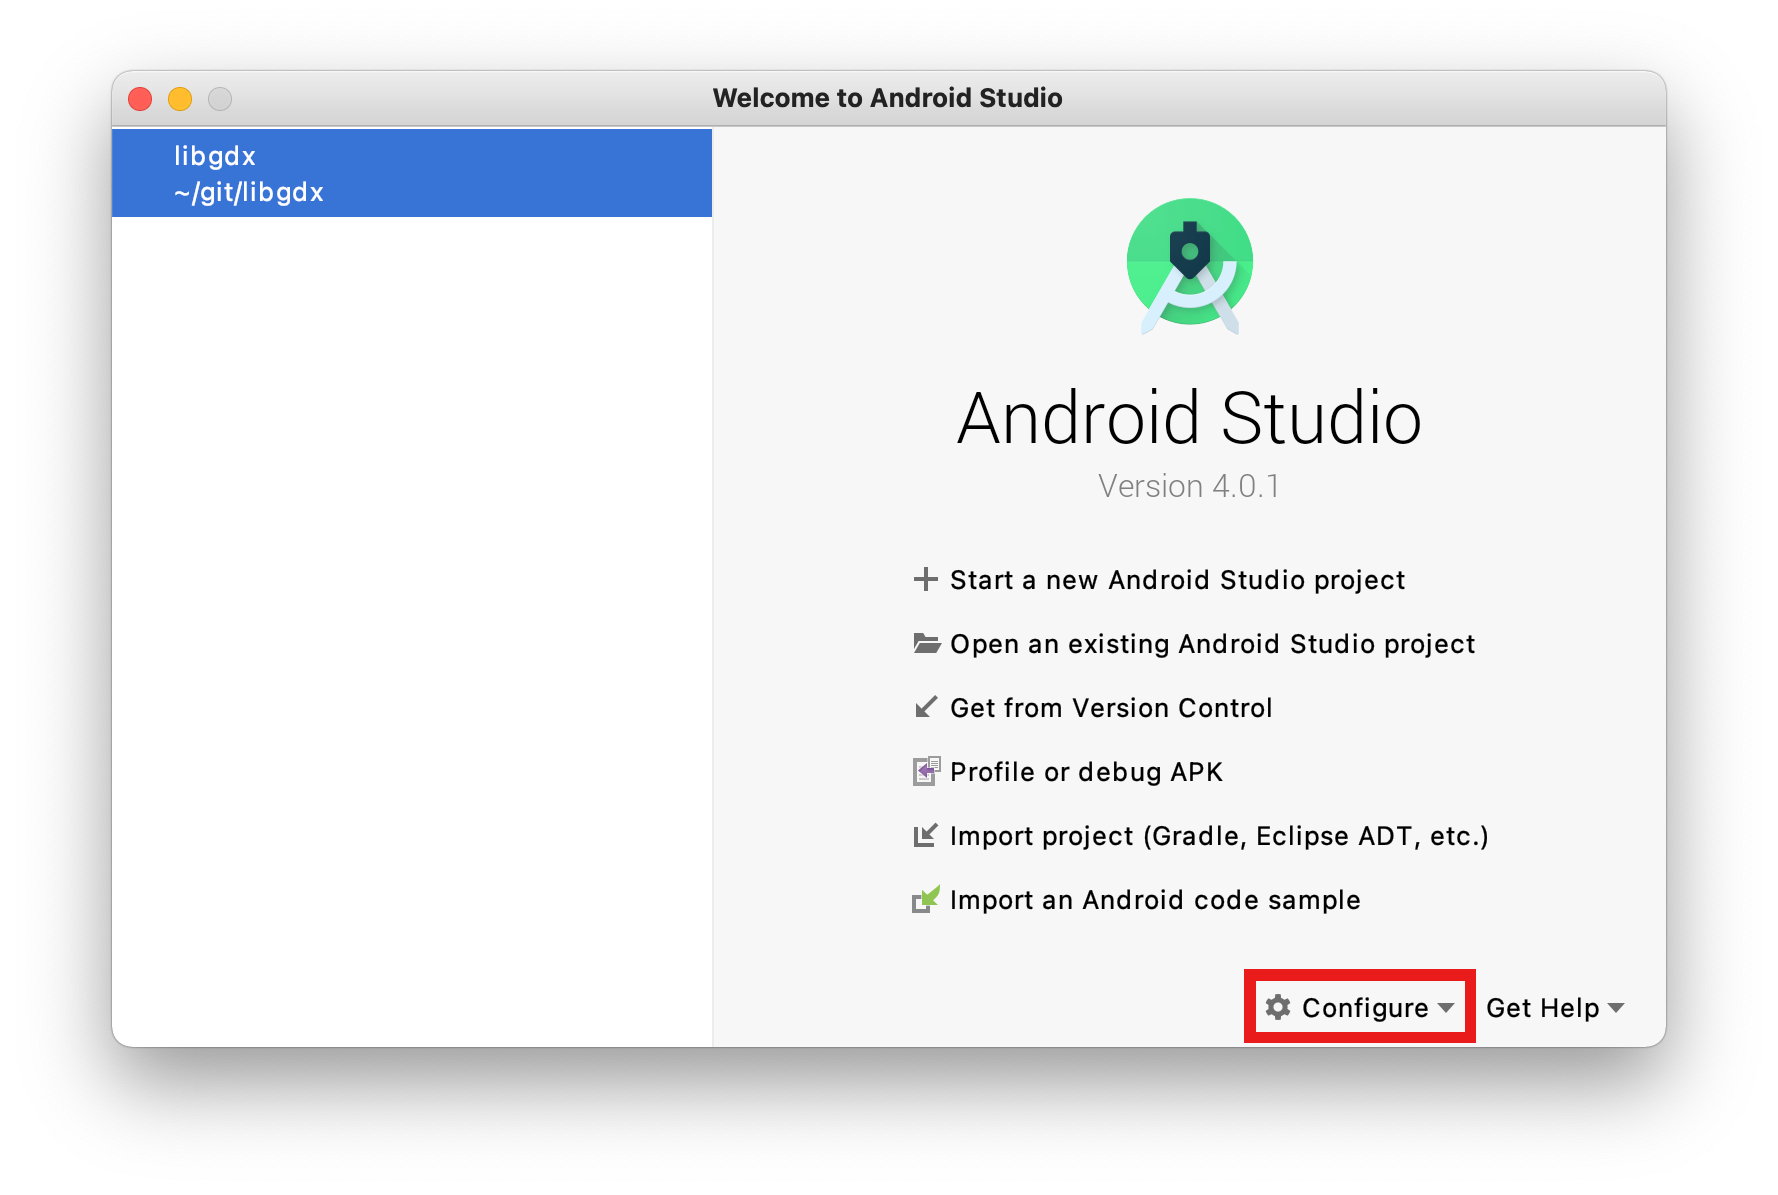 Android Studio welcome screen